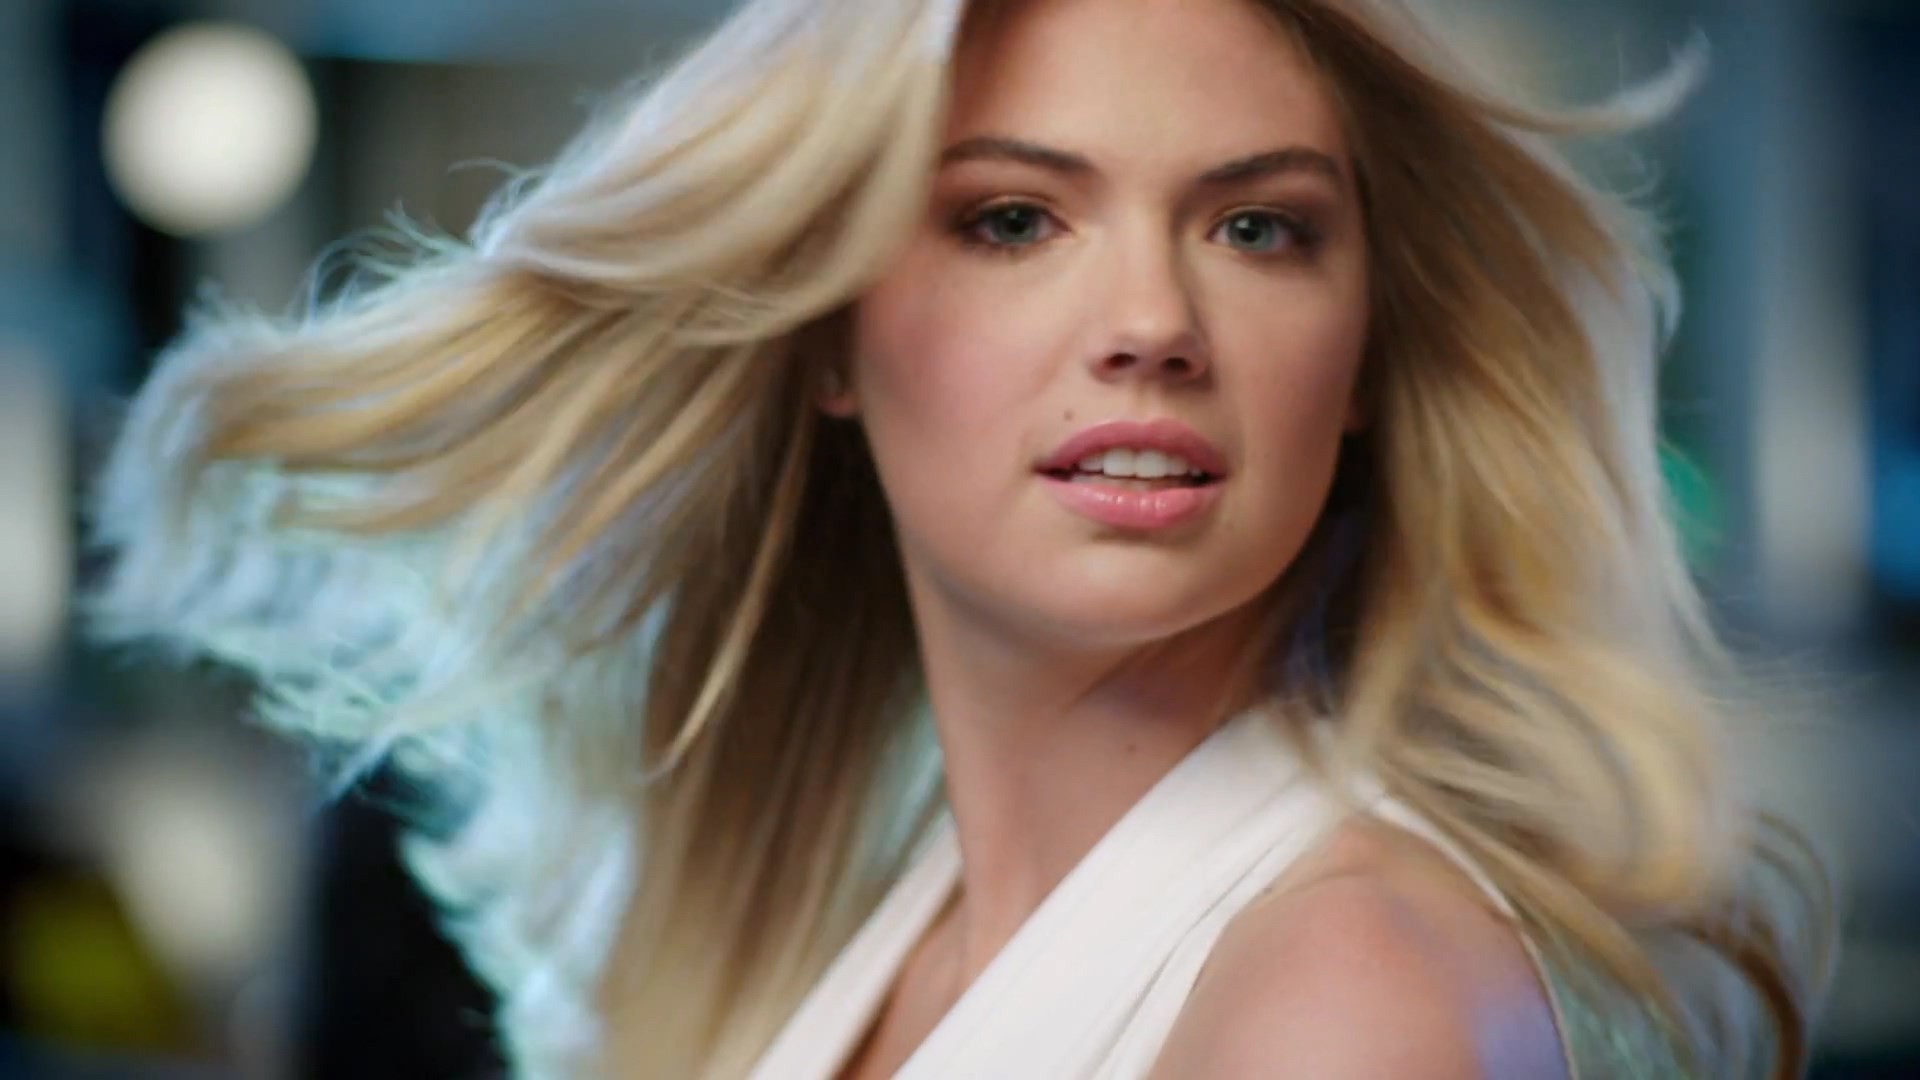 kate upton wallpaper,hair,blond,face,hairstyle,eyebrow